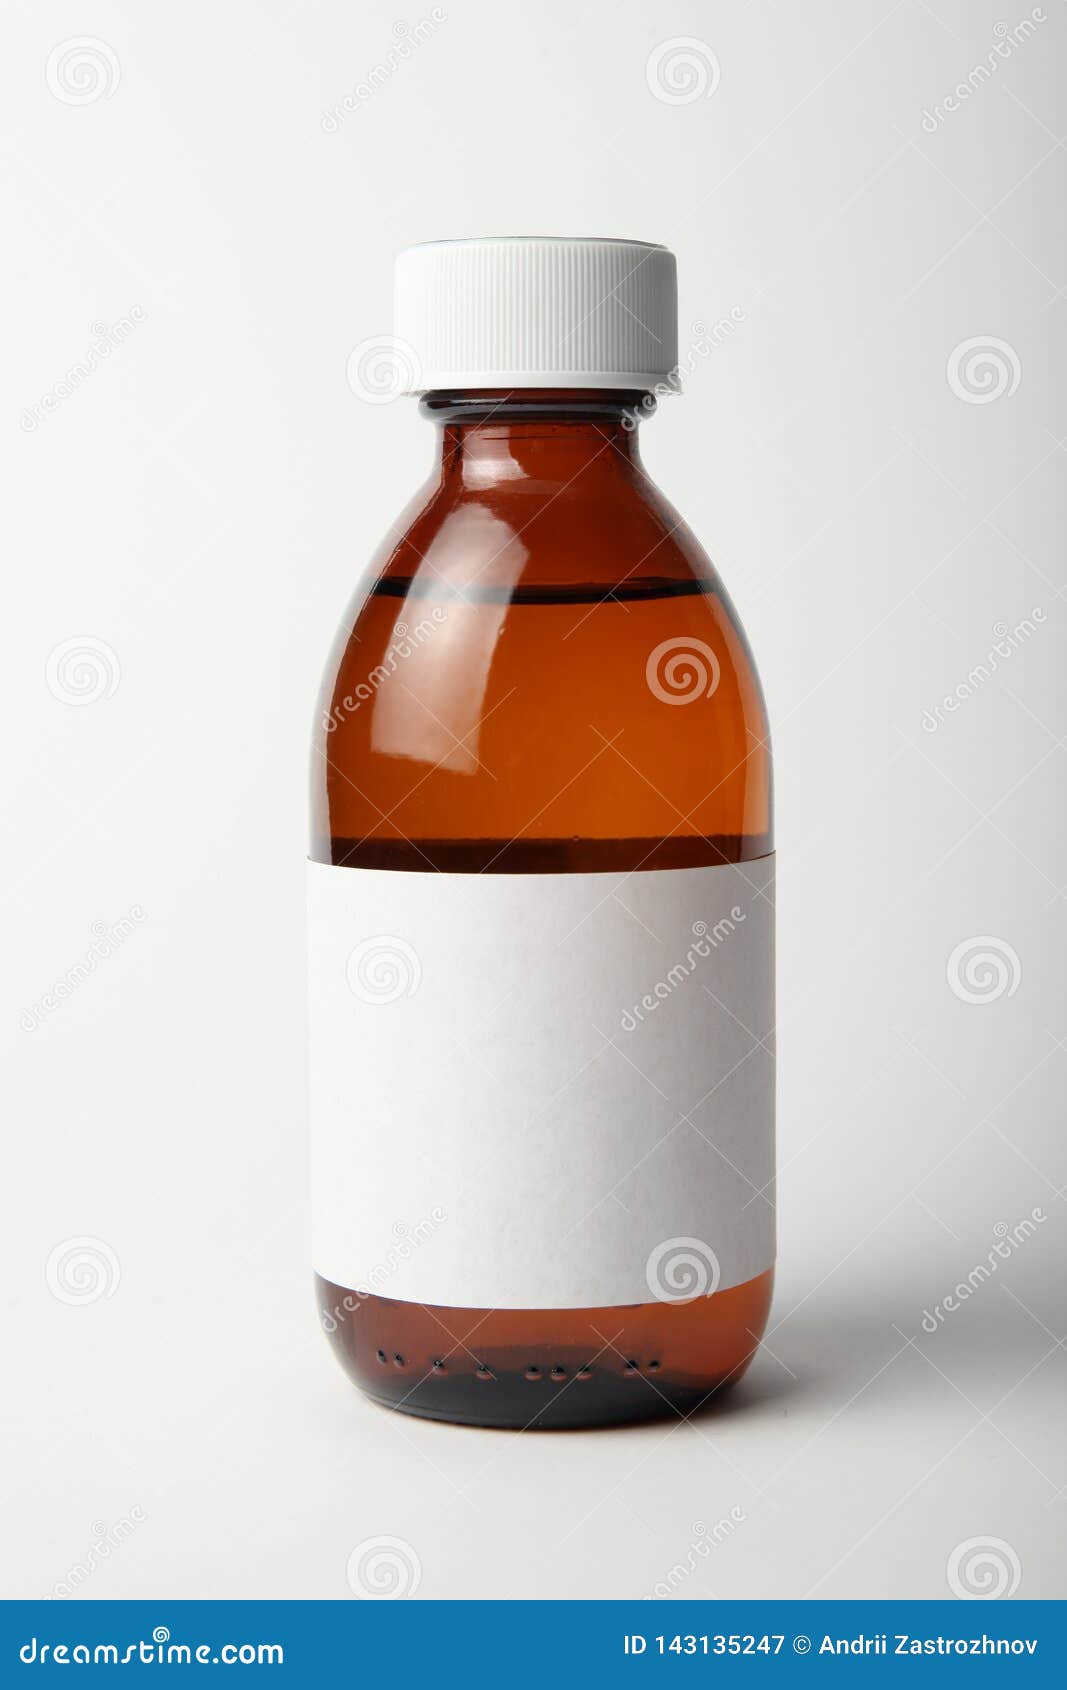 Download 15 897 Glass Bottle Mockup Photos Free Royalty Free Stock Photos From Dreamstime